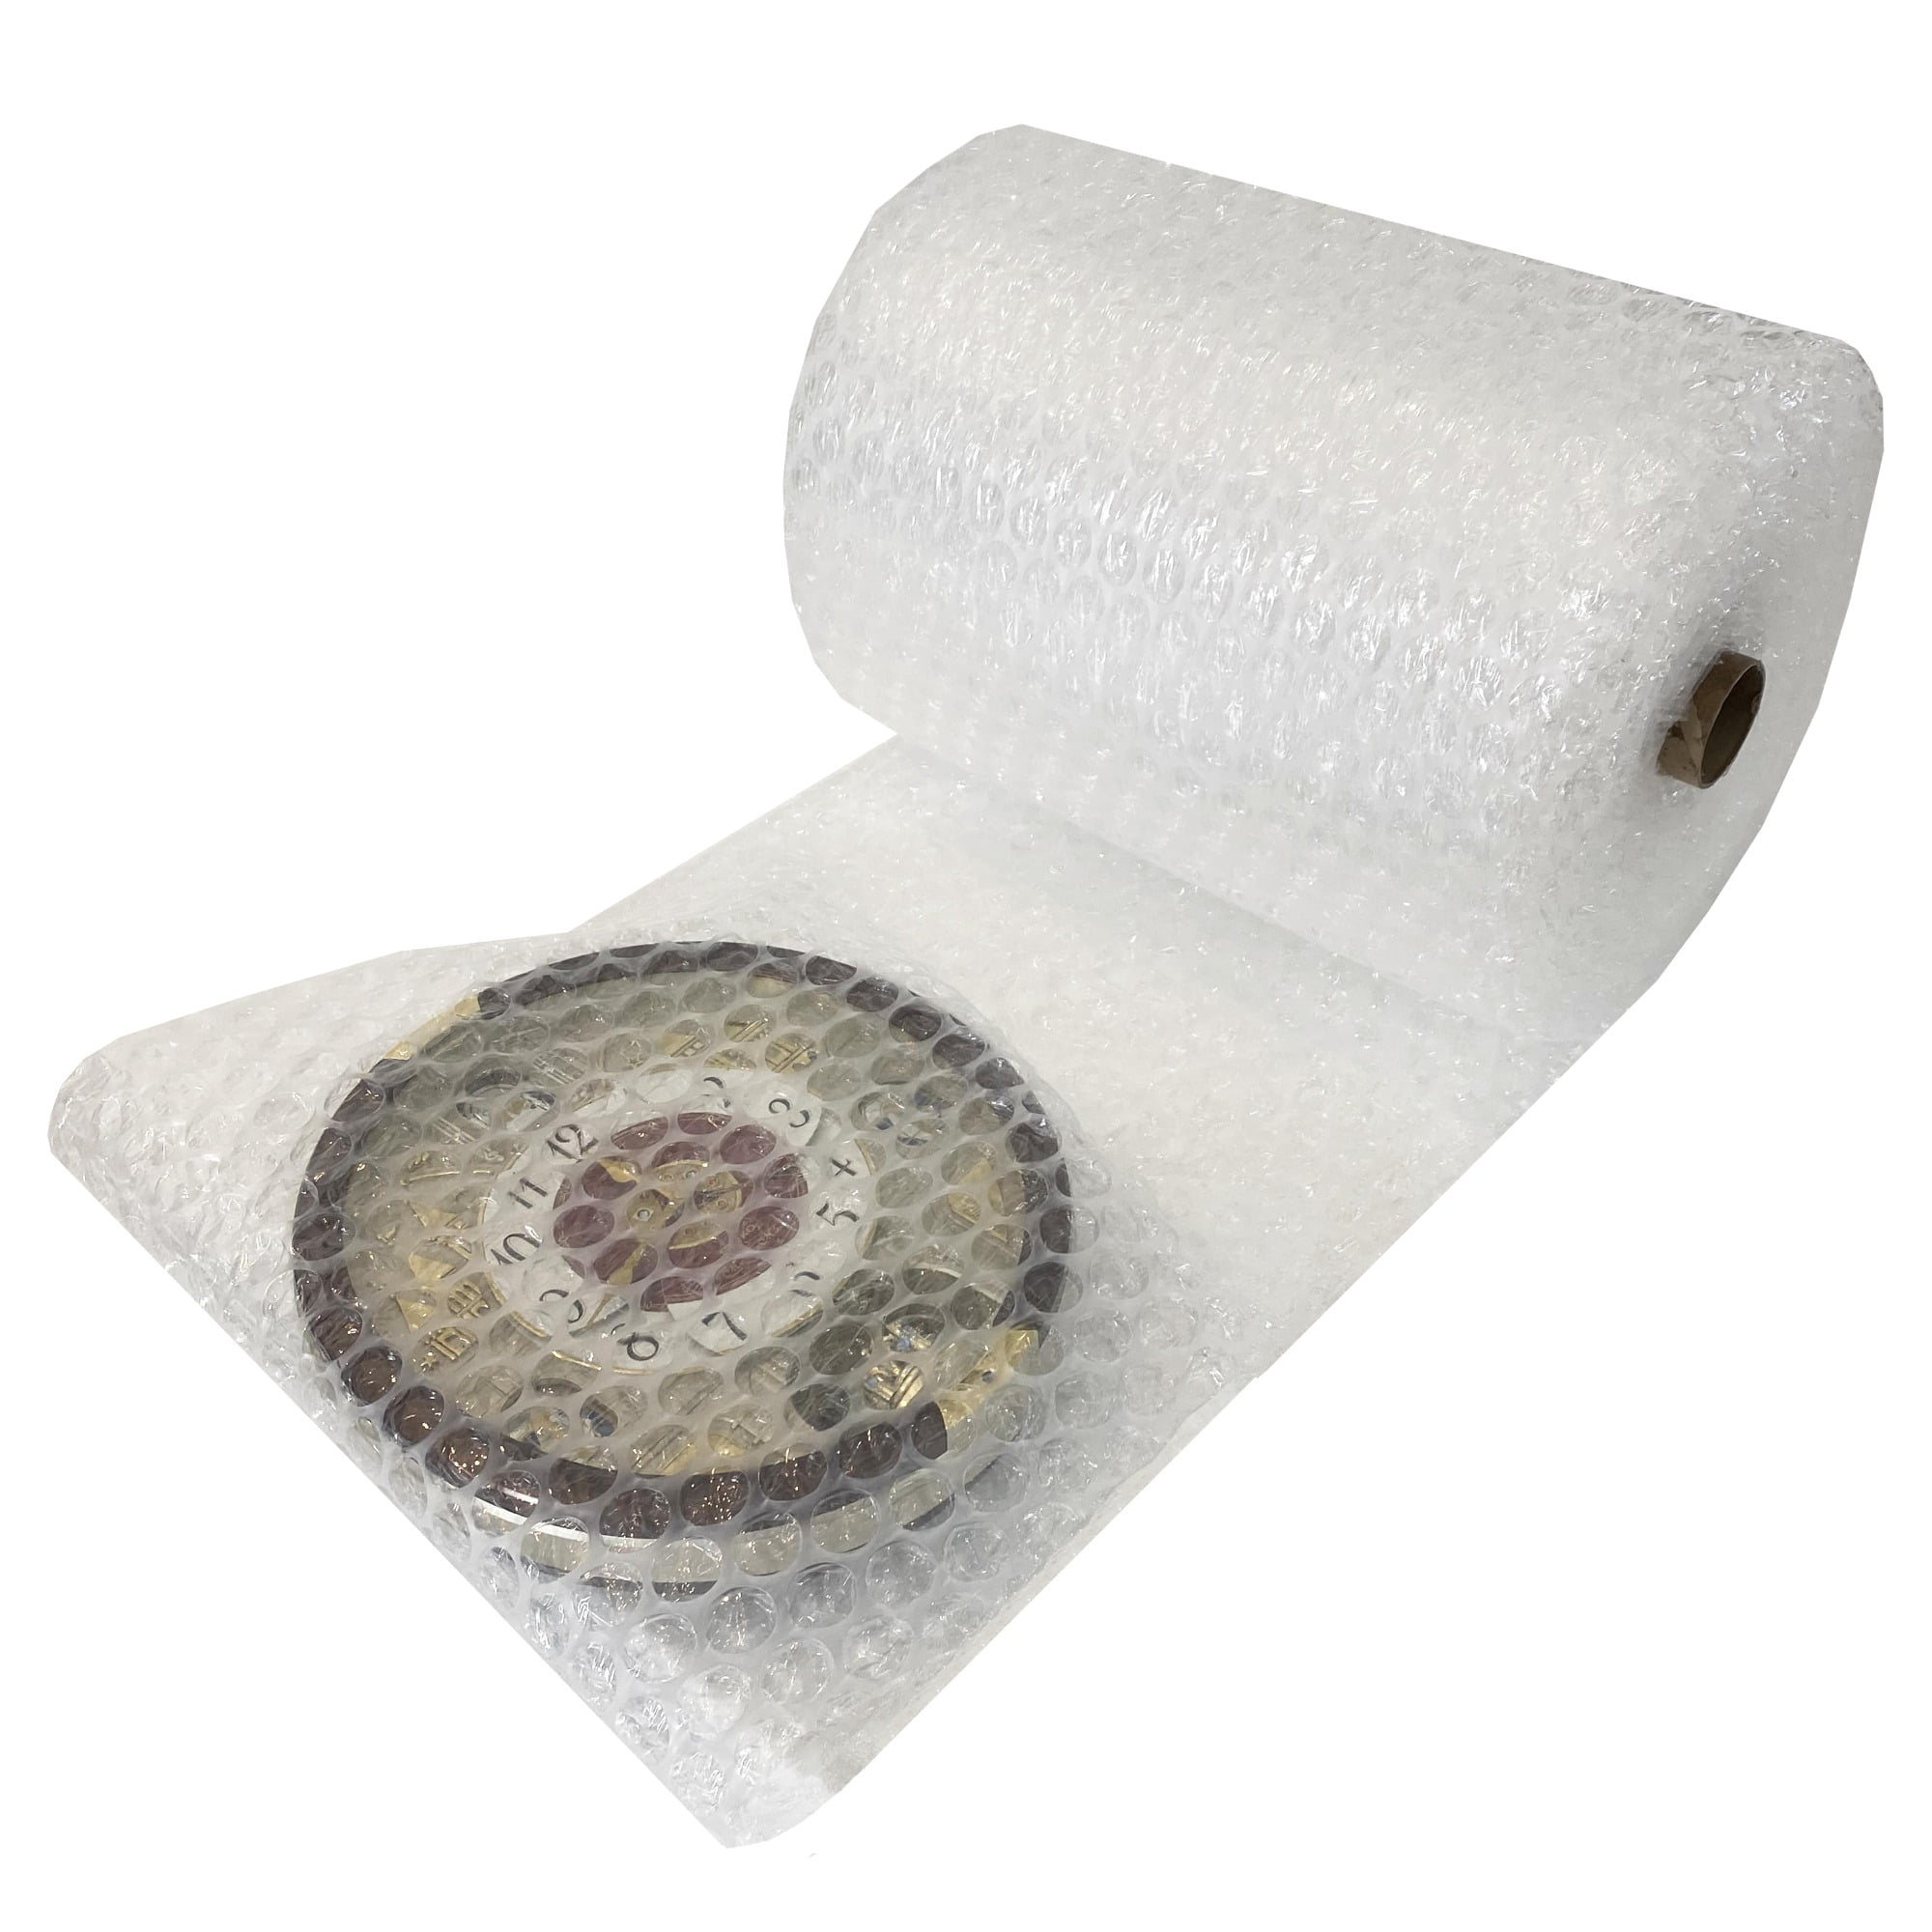 big bubble wrap rolls - One Hundred Dollars a Month